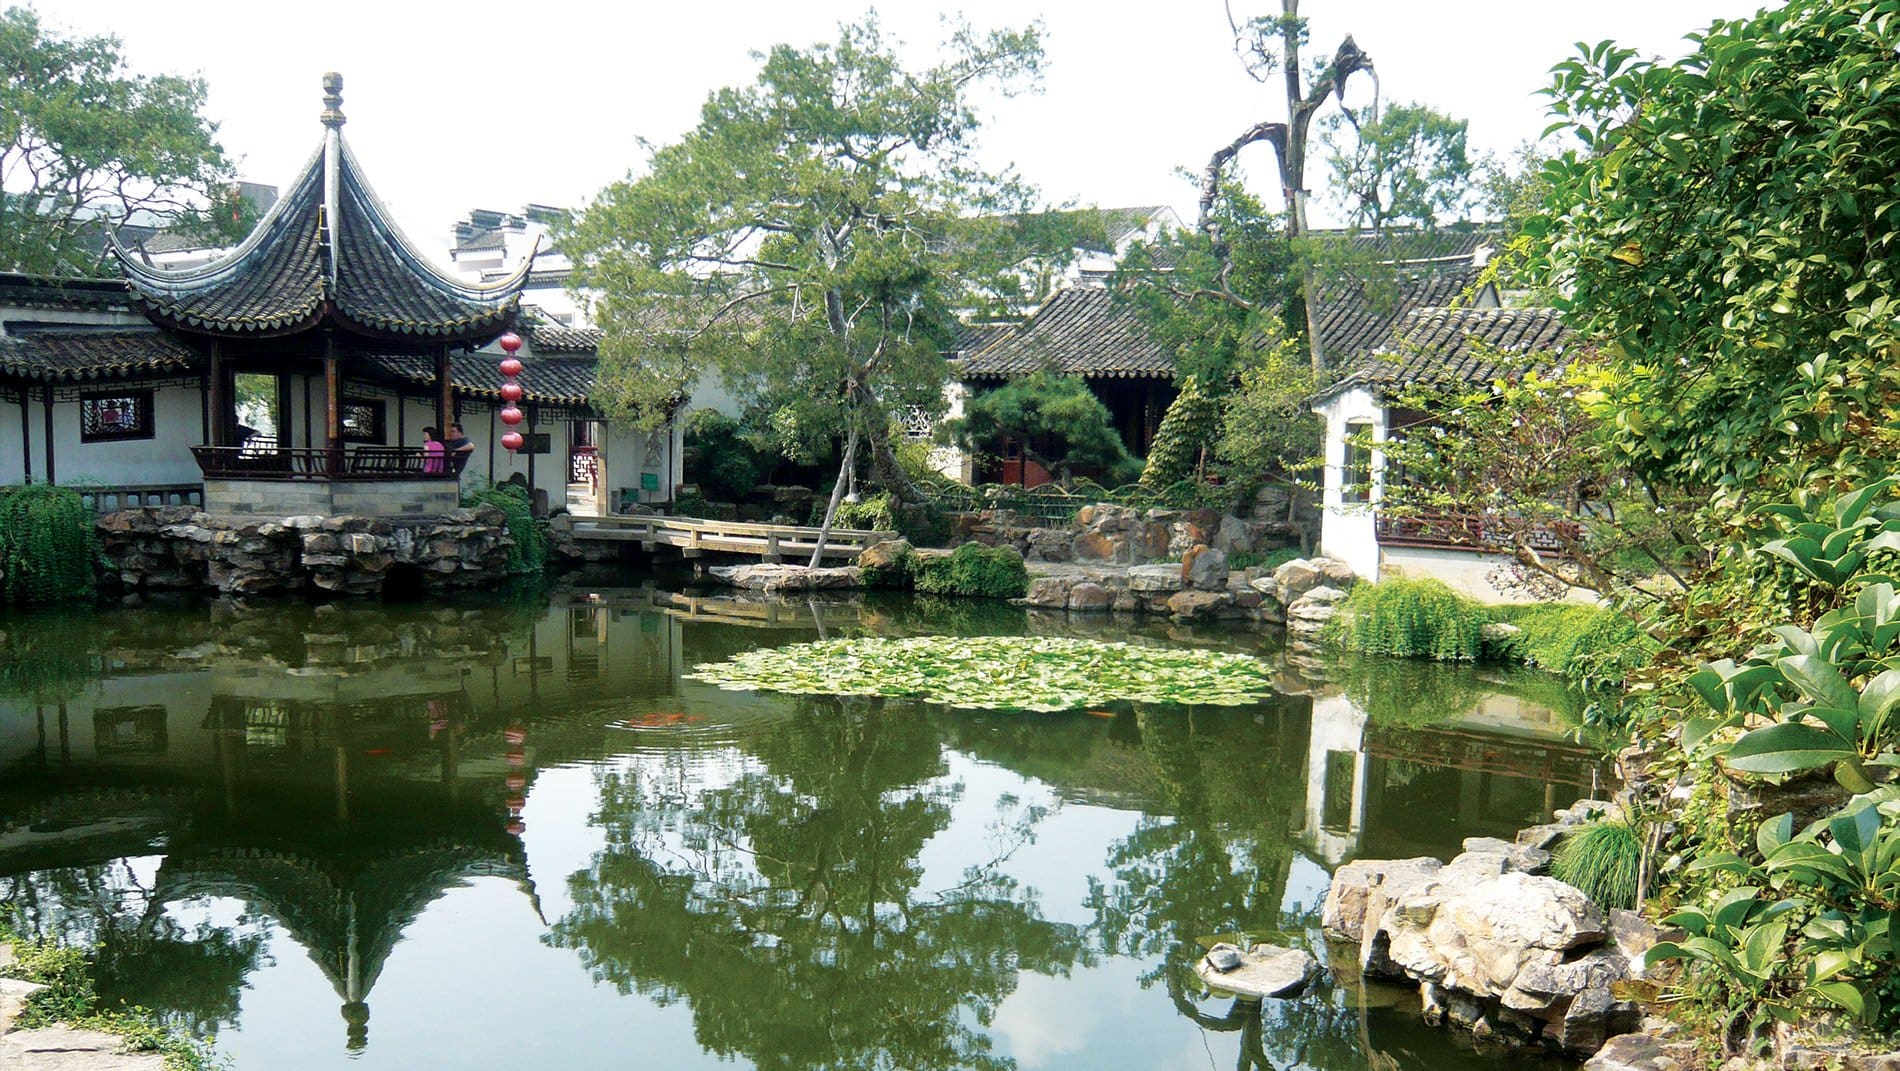 Traditional Gardens~The Chinese were already experimenting with private gardens from the Tang dynasty (618 - 907). There are 69 preserved gardens left in Suzhou, most dating from the mid-Ming (1500) to the early Qing (1720) dynasties.